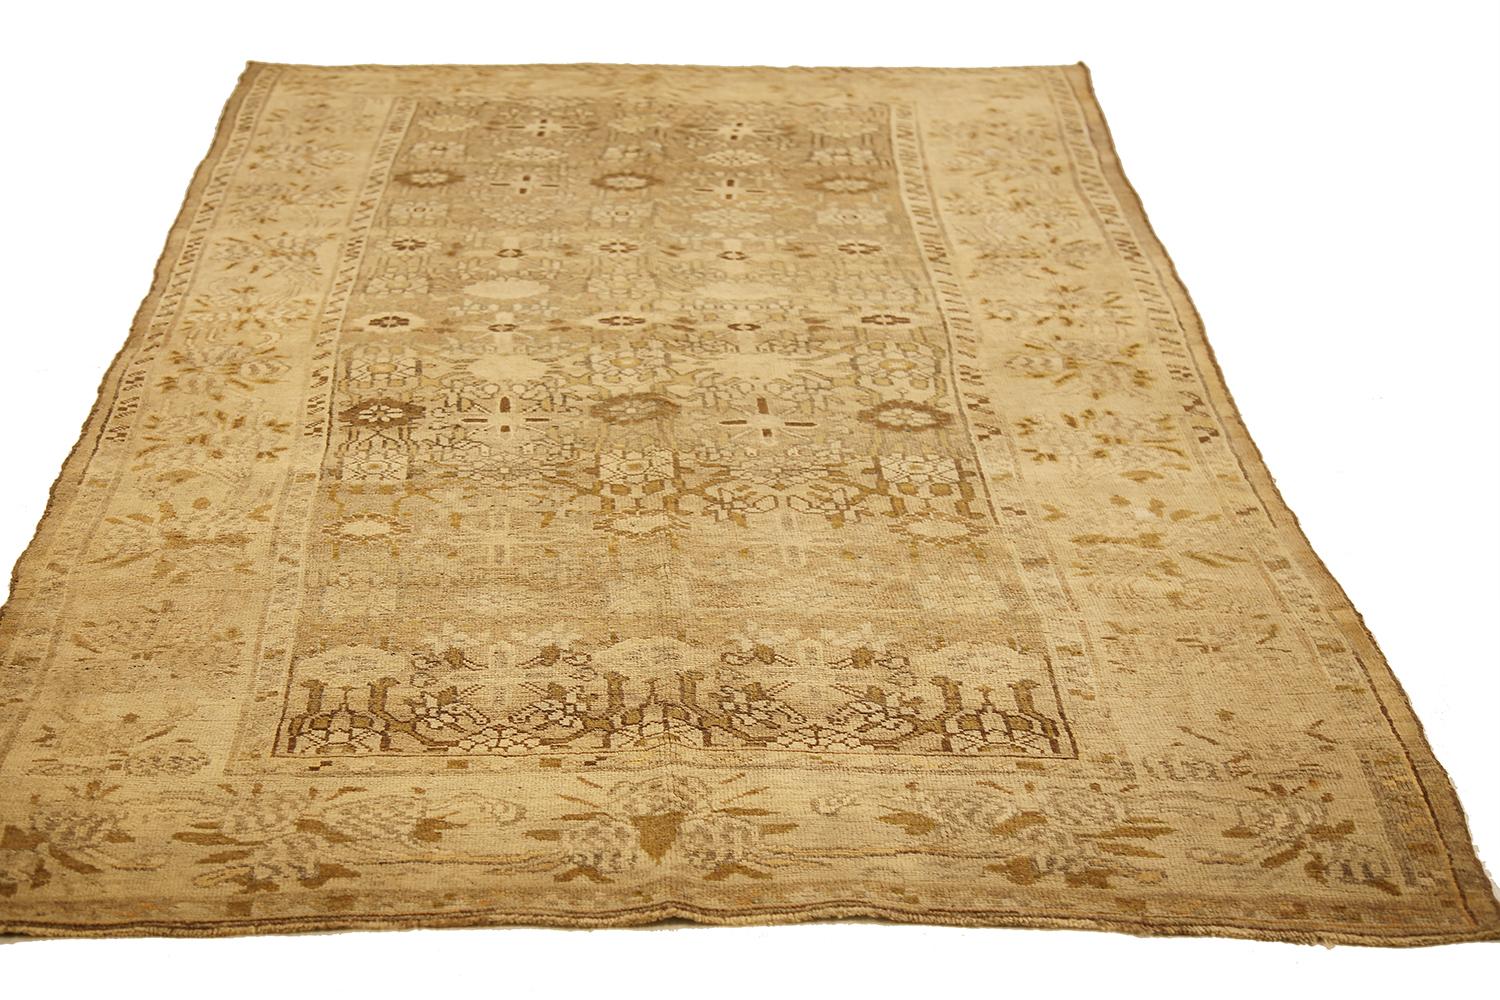 Antique Persian rug handwoven from the finest sheep’s wool and colored with all-natural vegetable dyes that are safe for humans and pets. It’s a traditional Bijar design featuring lovely brown and beige floral details. It has all-over rows of floral